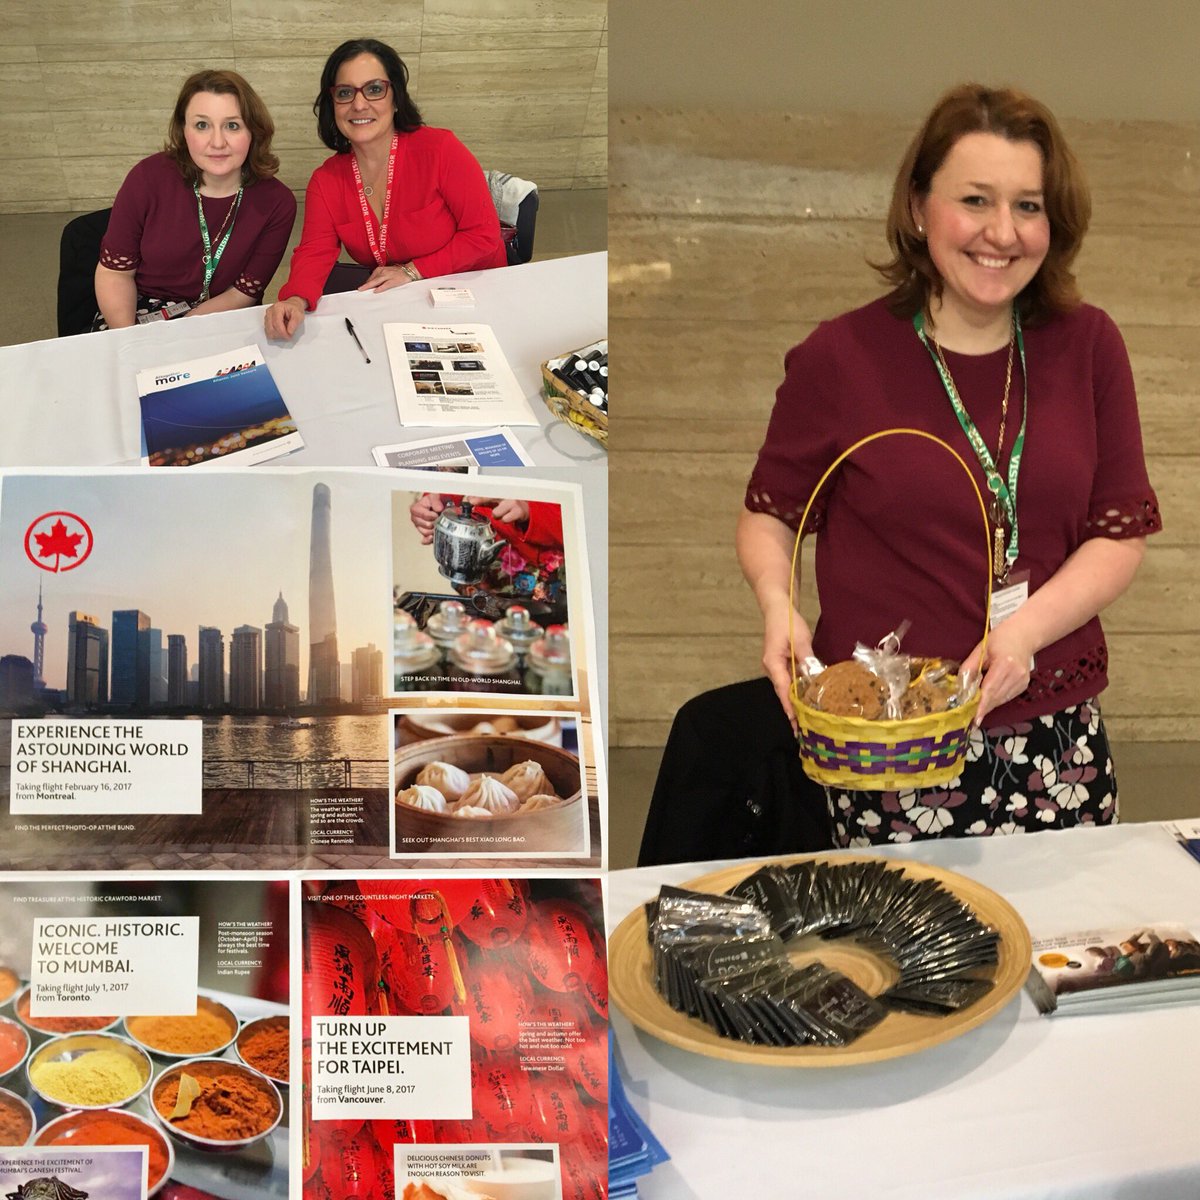 When your @Lufthansa_USA  individually wraps cookies for a #TravelFair @Fiat. You know you are part of the best #JVstarpartners. @AirCanada.